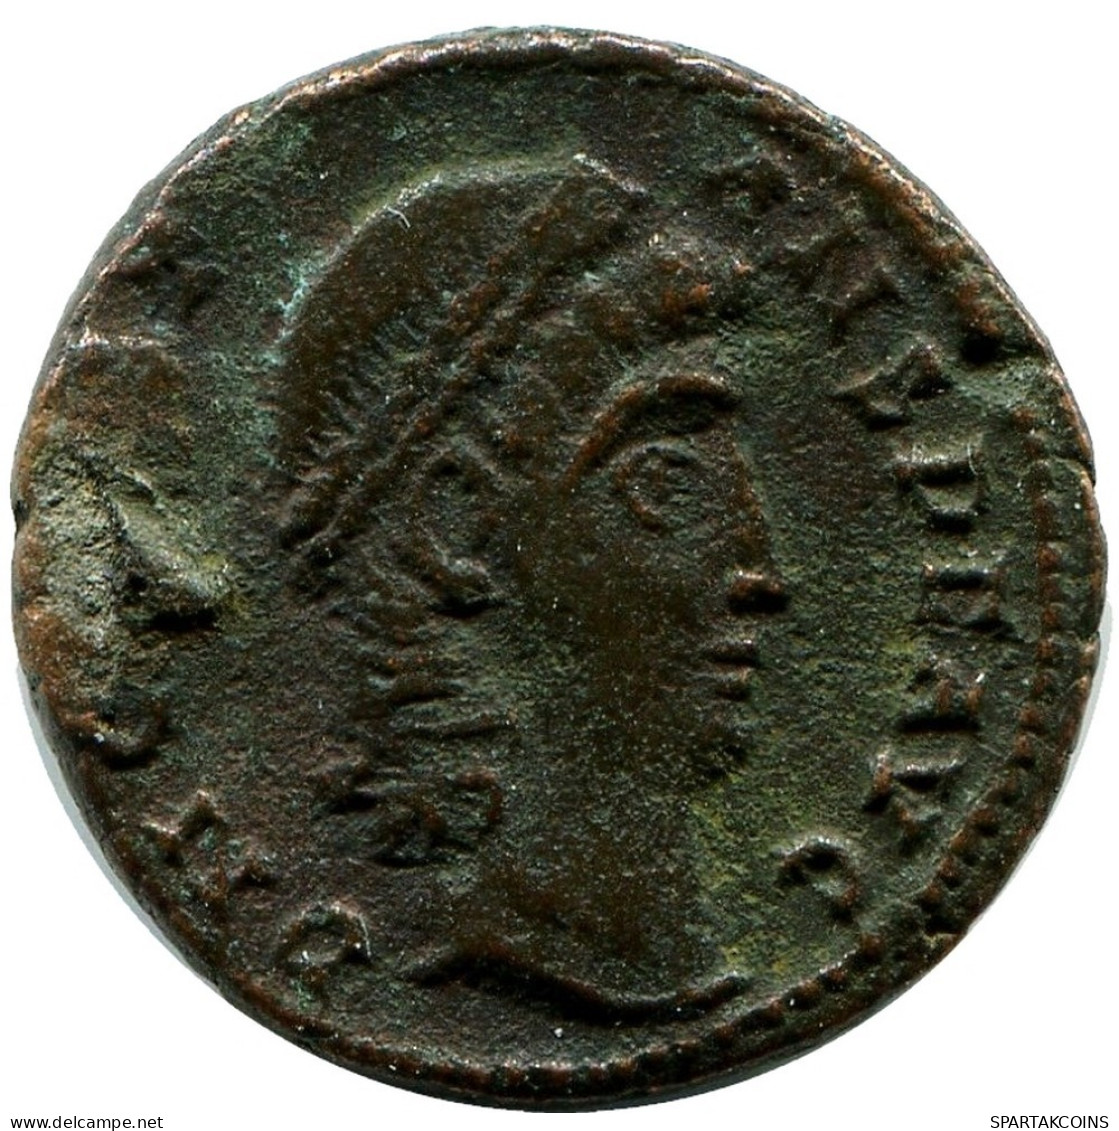 CONSTANS MINTED IN ALEKSANDRIA FROM THE ROYAL ONTARIO MUSEUM #ANC11424.14.F.A - El Imperio Christiano (307 / 363)